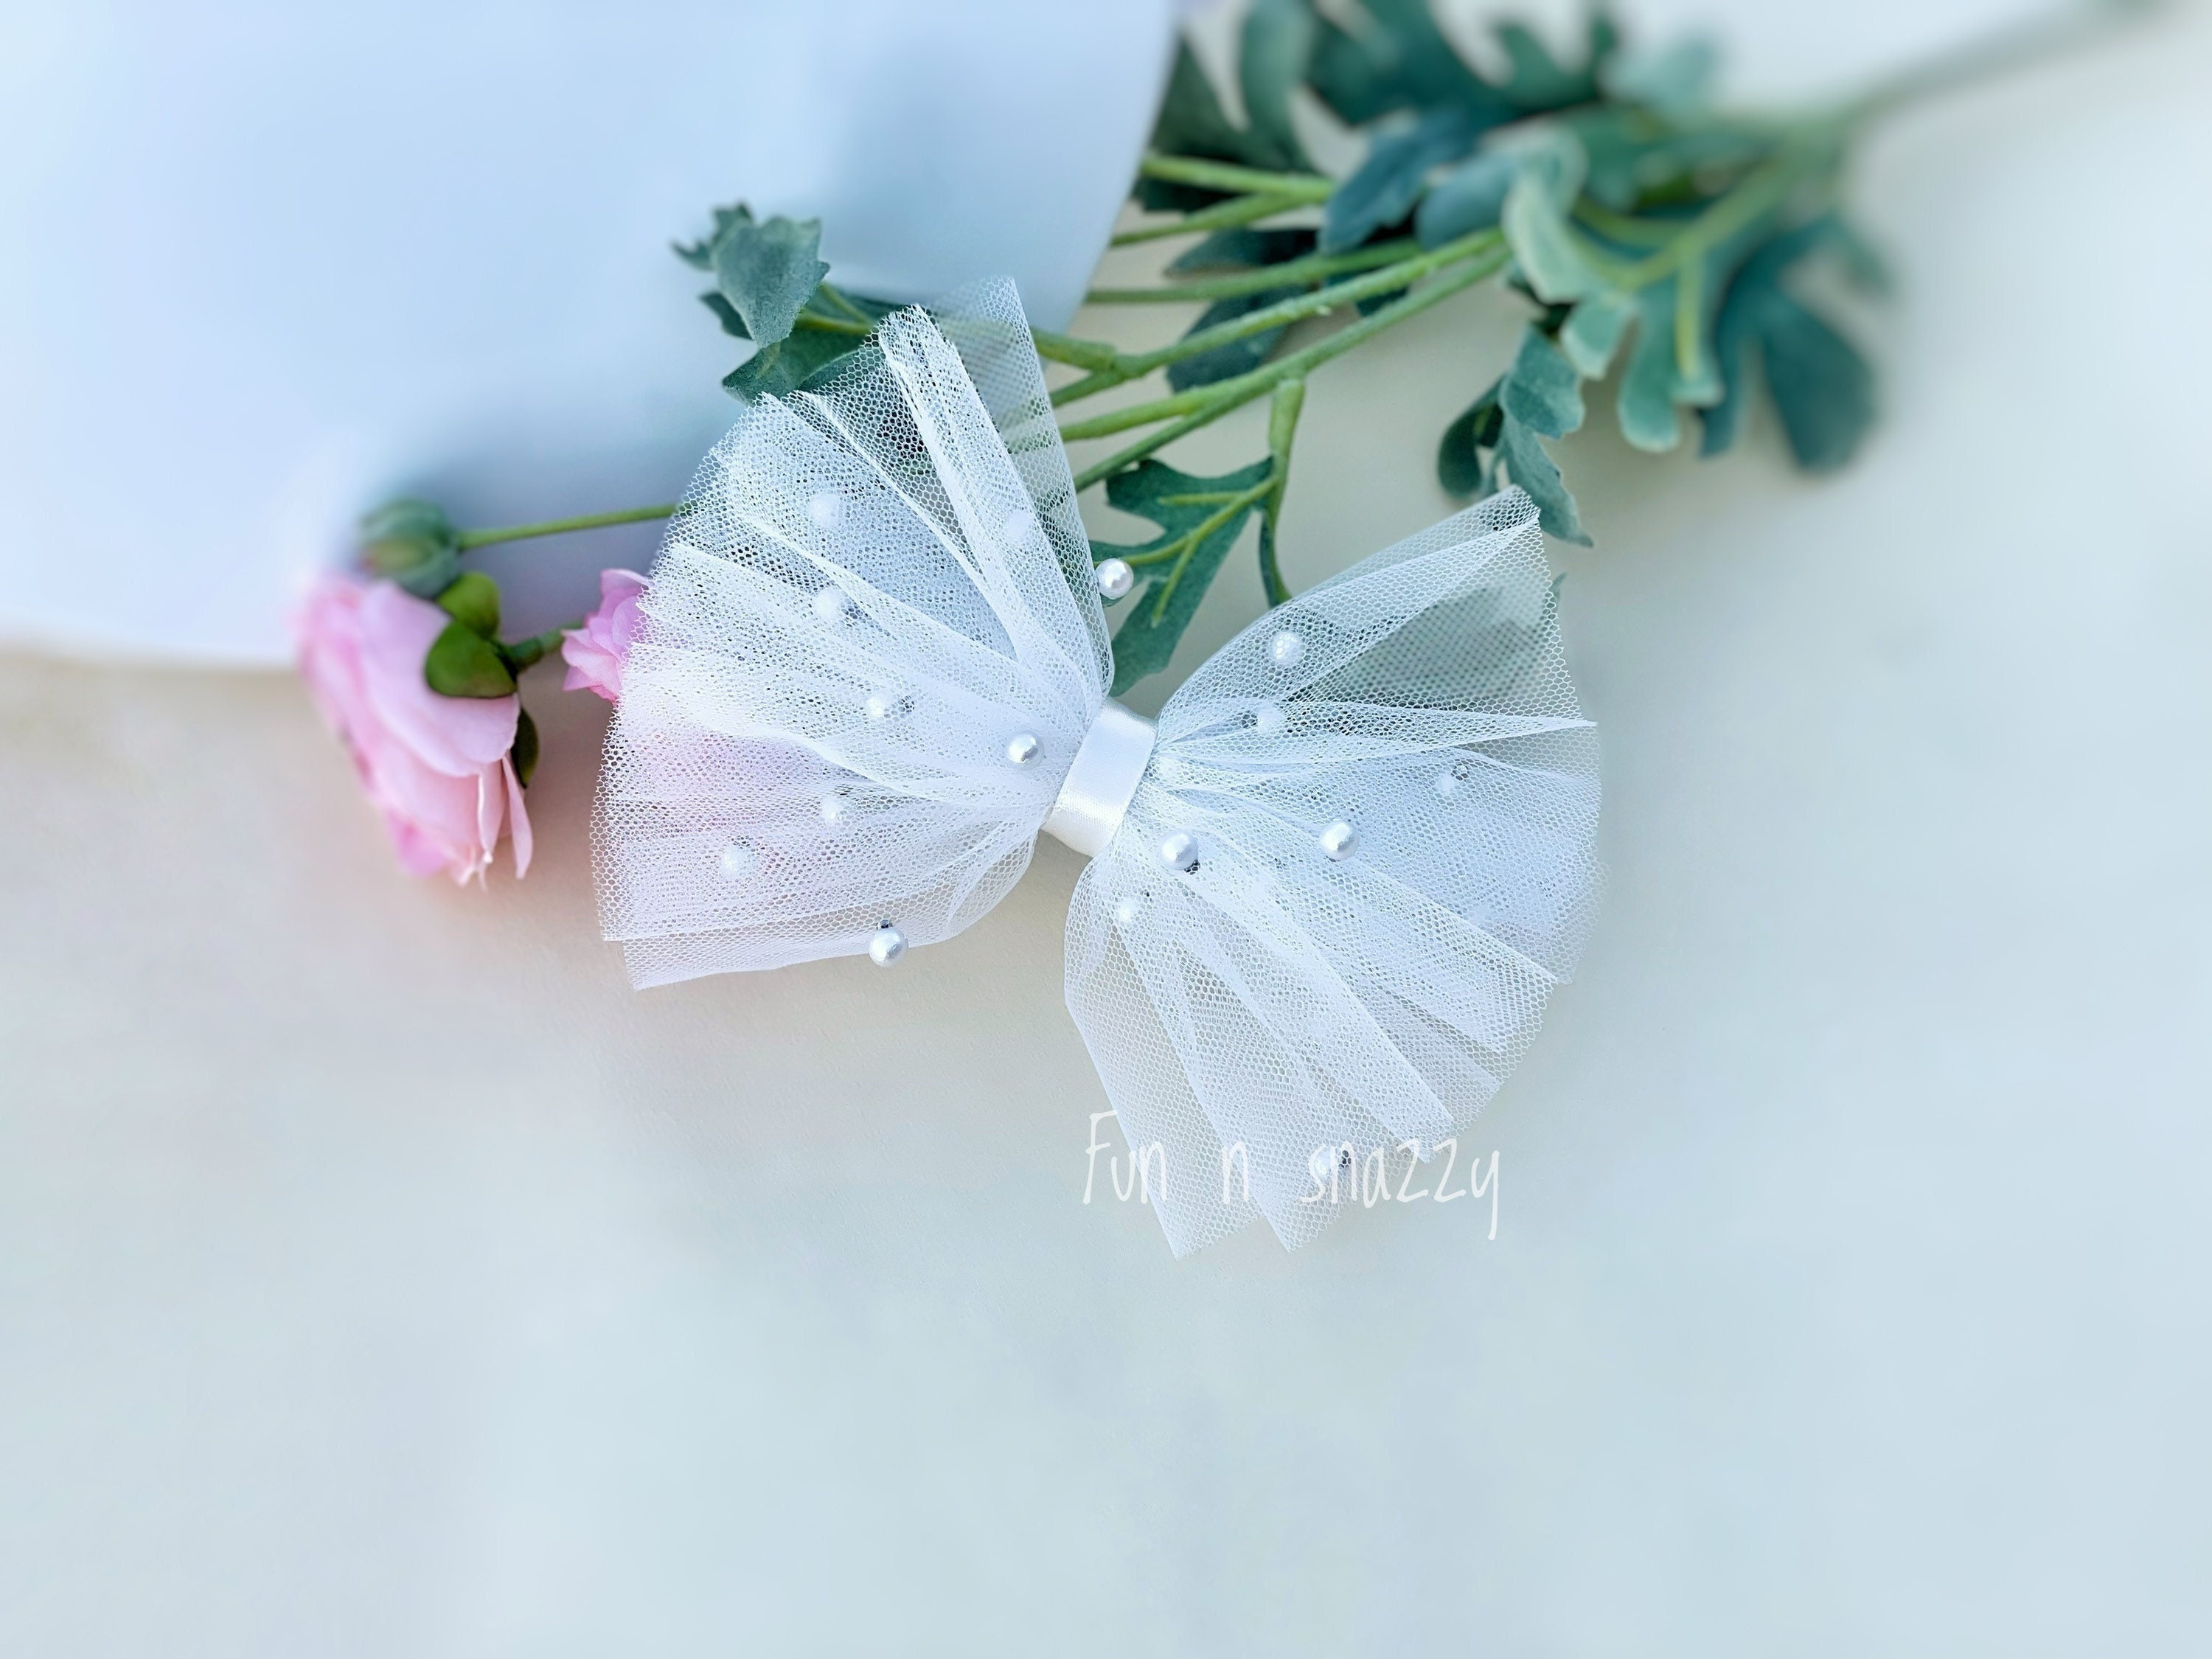 White Tulle Bows (Set of 2) – So Whimsical - Bows & Accessories